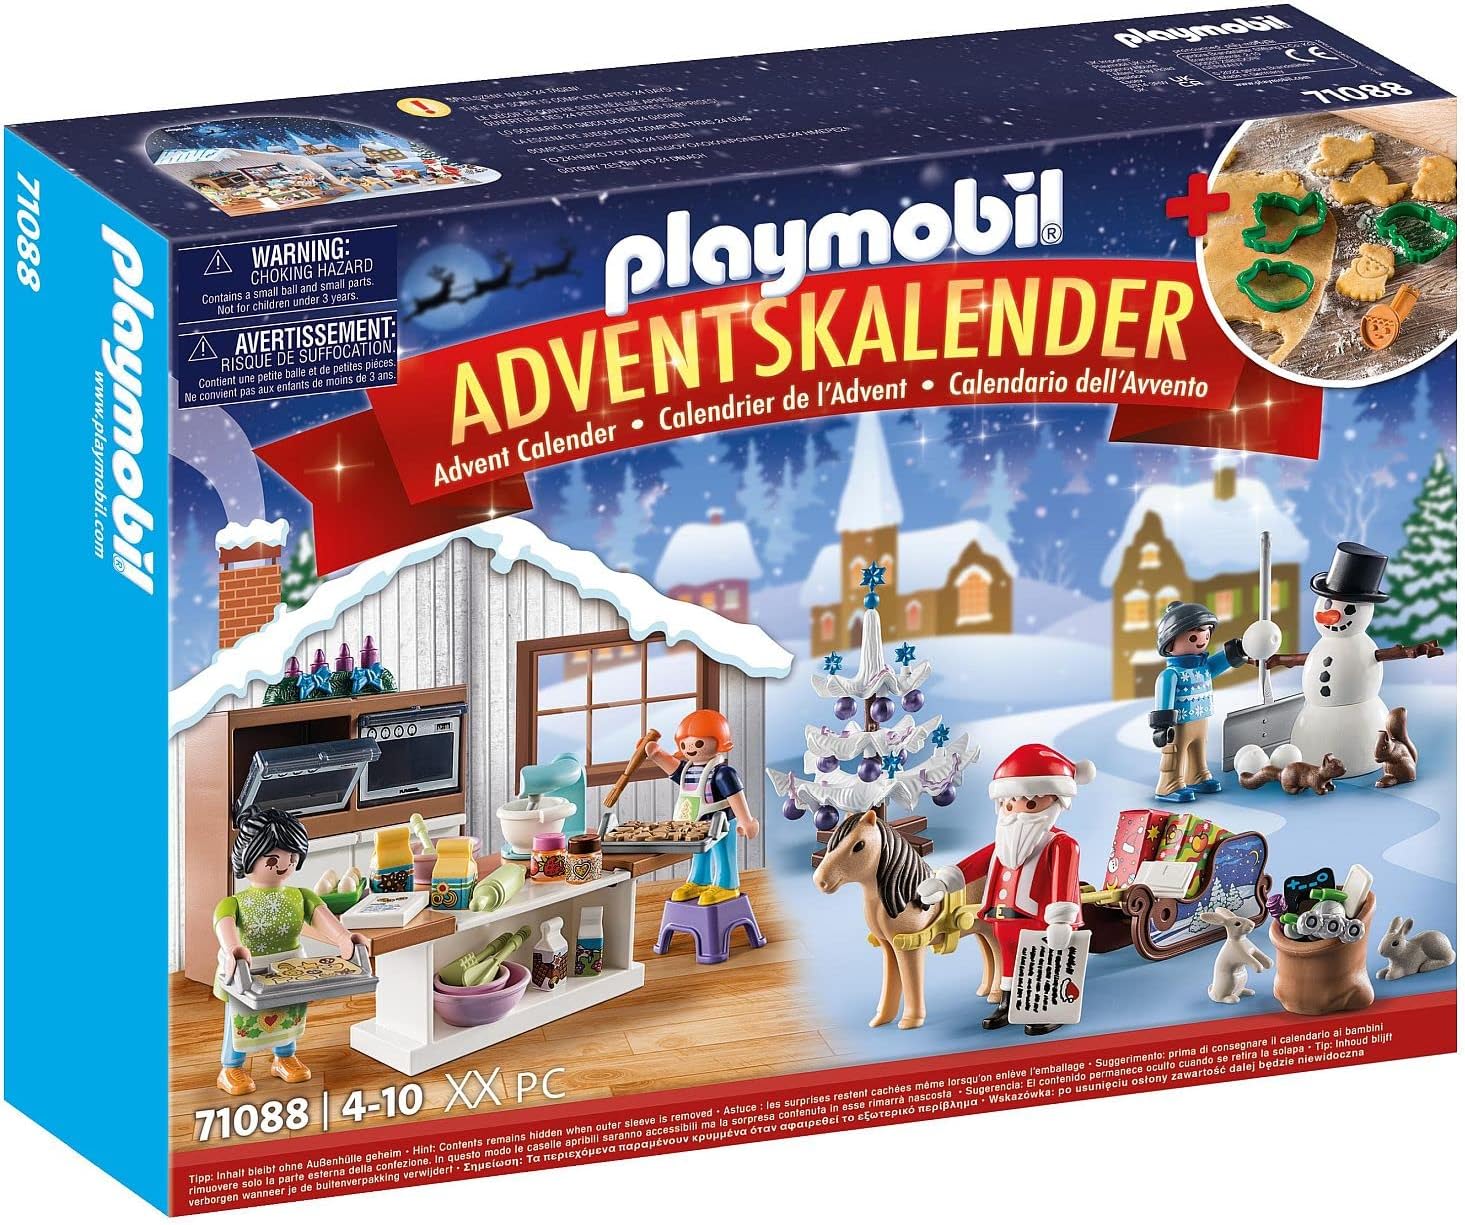 Playmobil Christmas 71088 Advent Calendar for Children: Christmas Baking with Cookie Shapes, Includes Toy Bakery, Toy for Children from 4 Years